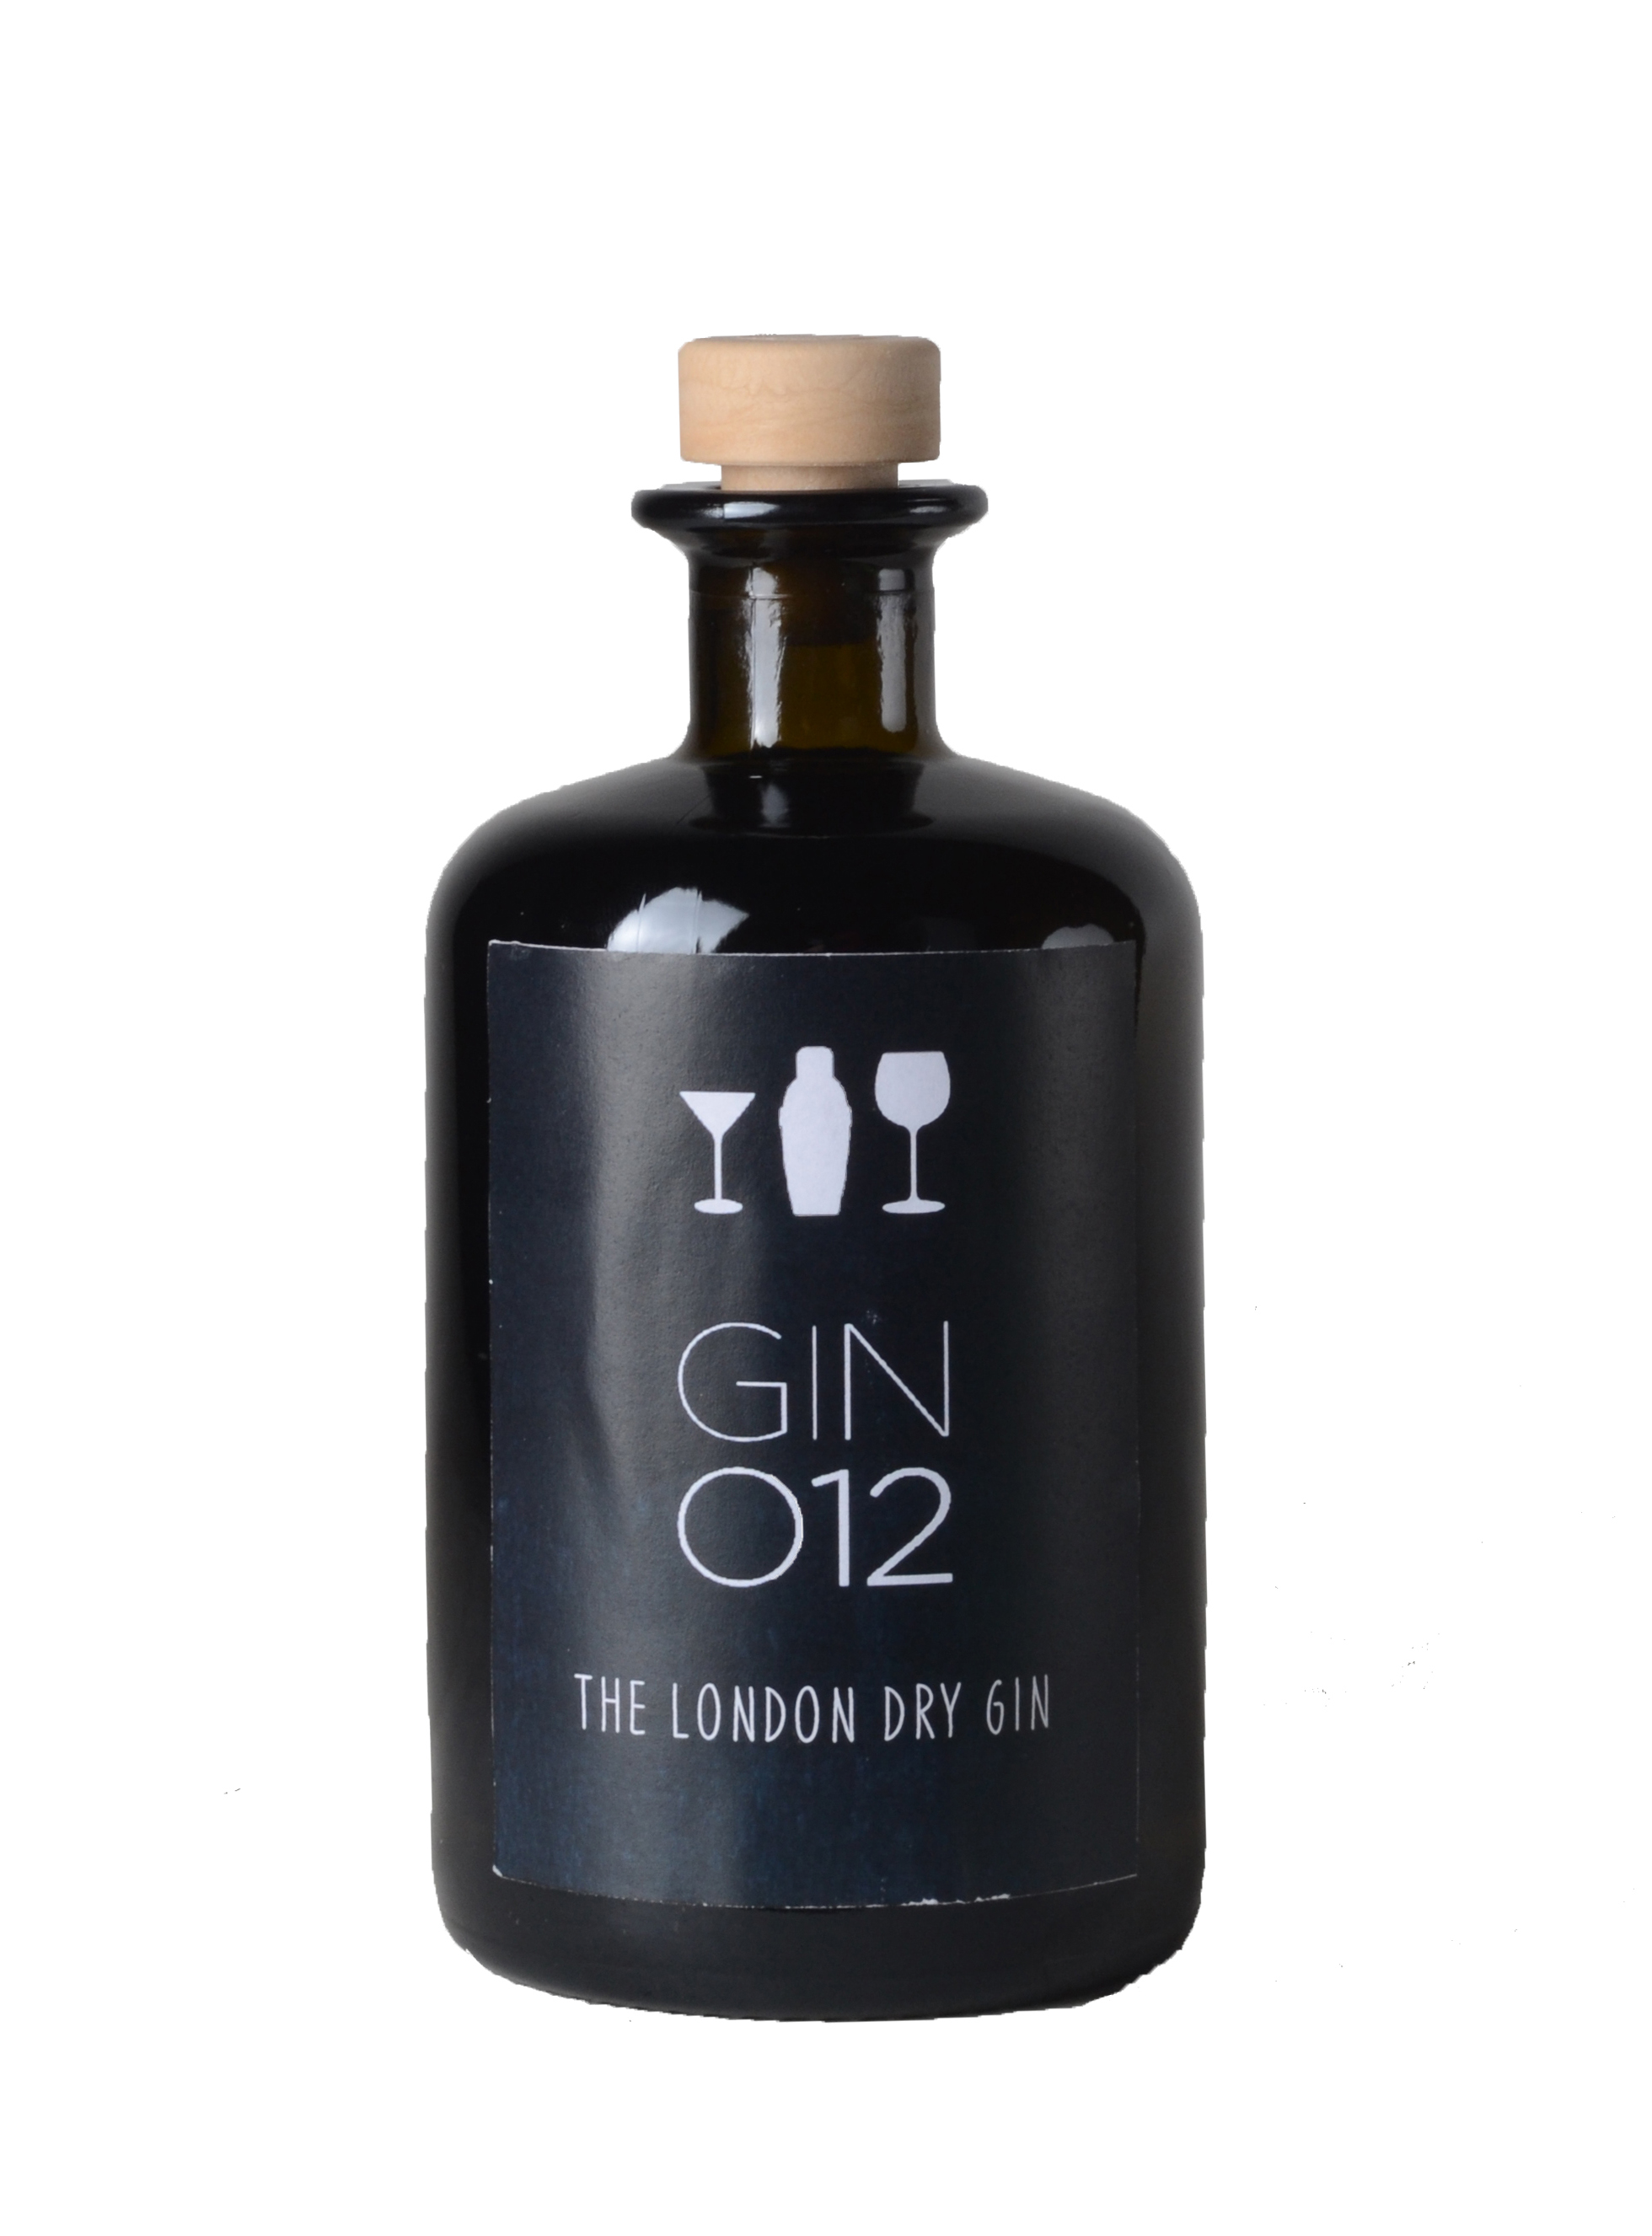 The London dry gin